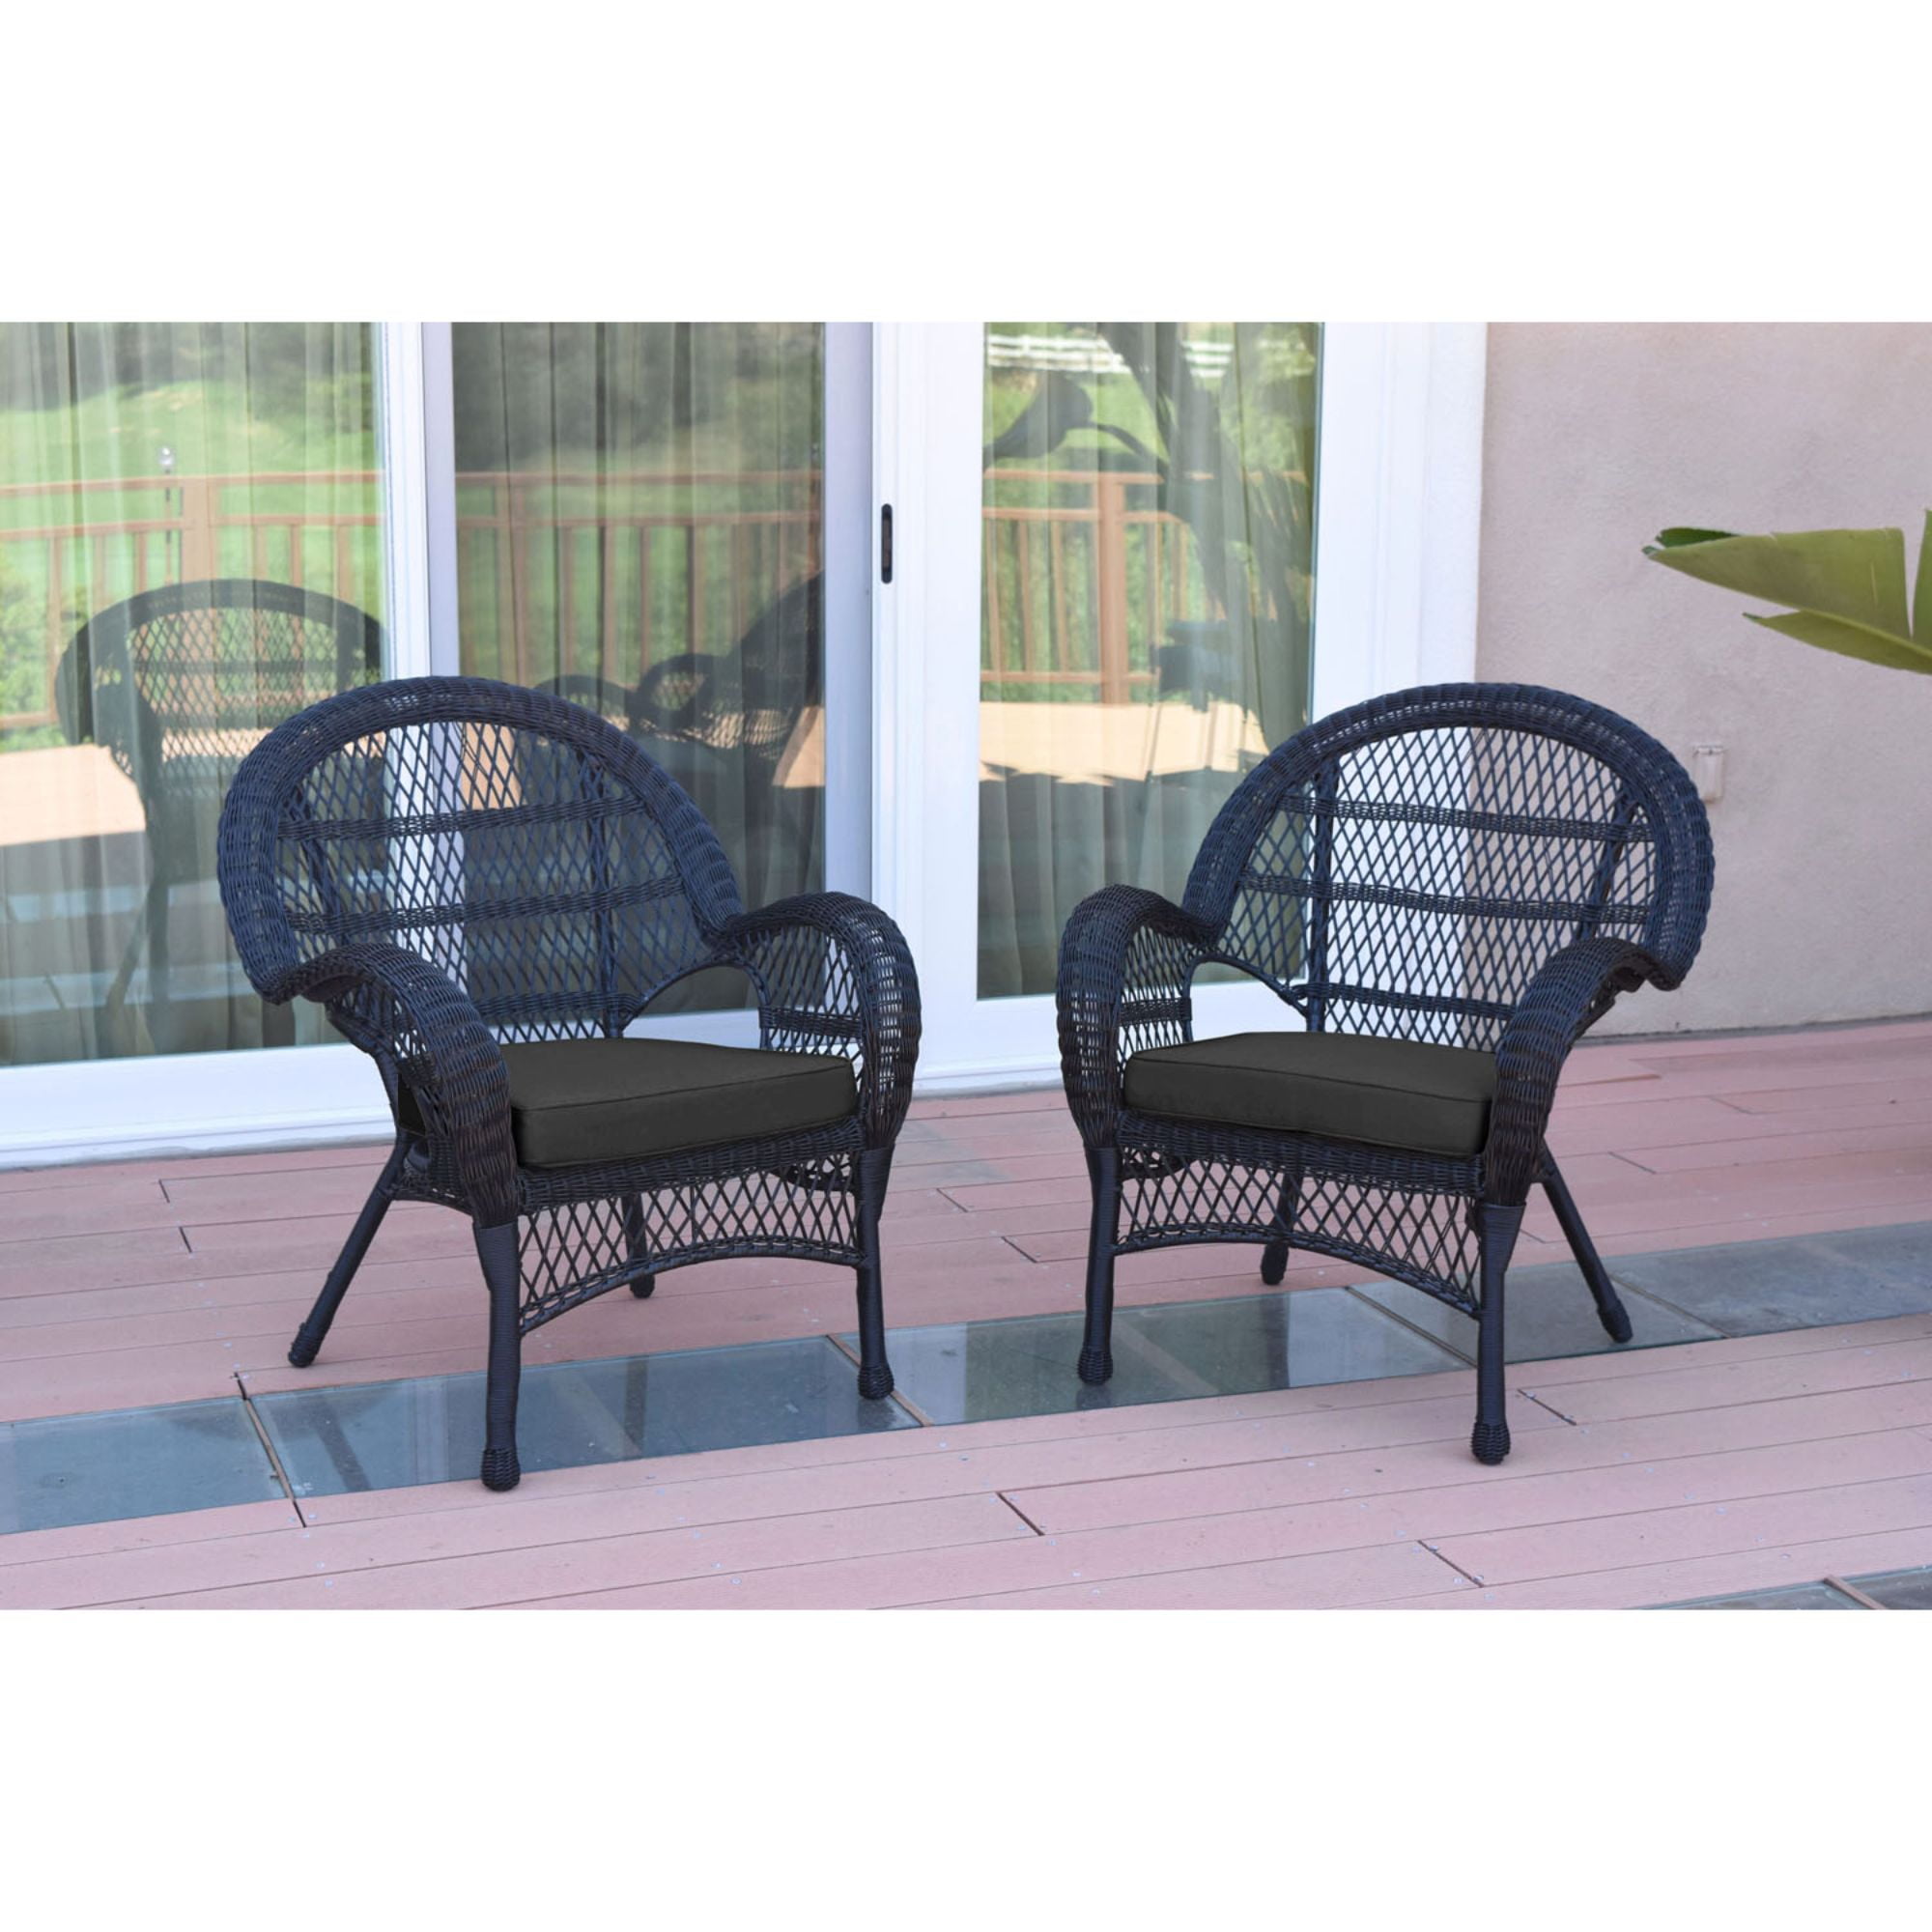 2-Piece Black Outdoor Furniture Patio Resin Wicker Chair with Black